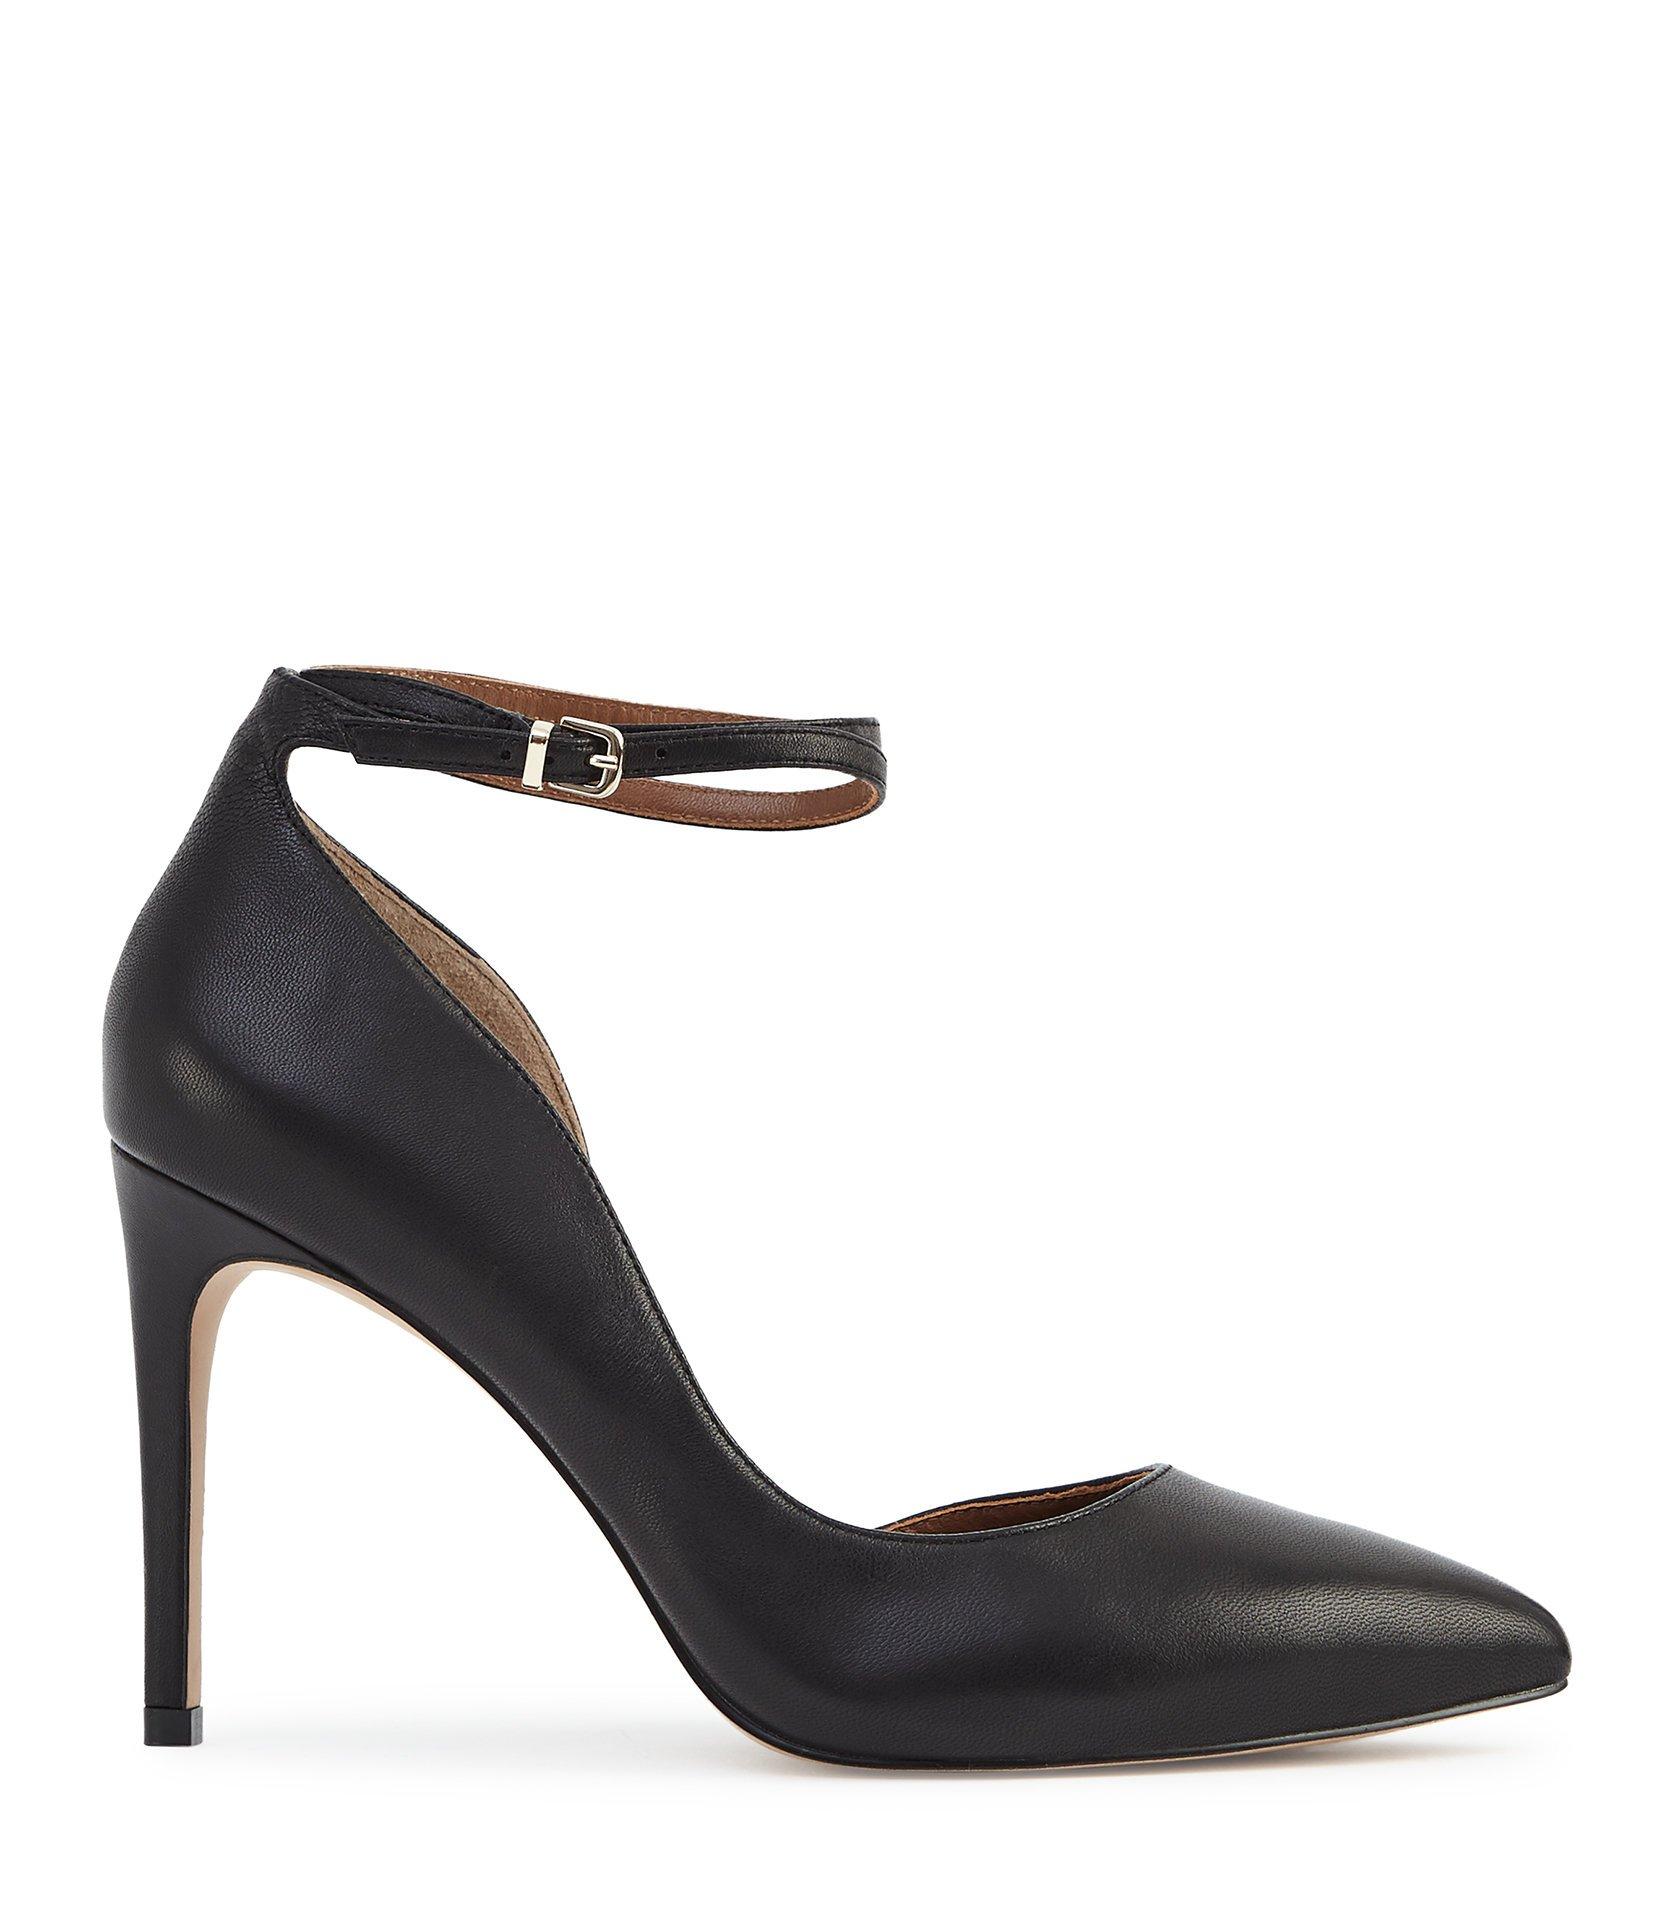 Reiss Leather Ankle Strap Shoes in Black - Lyst